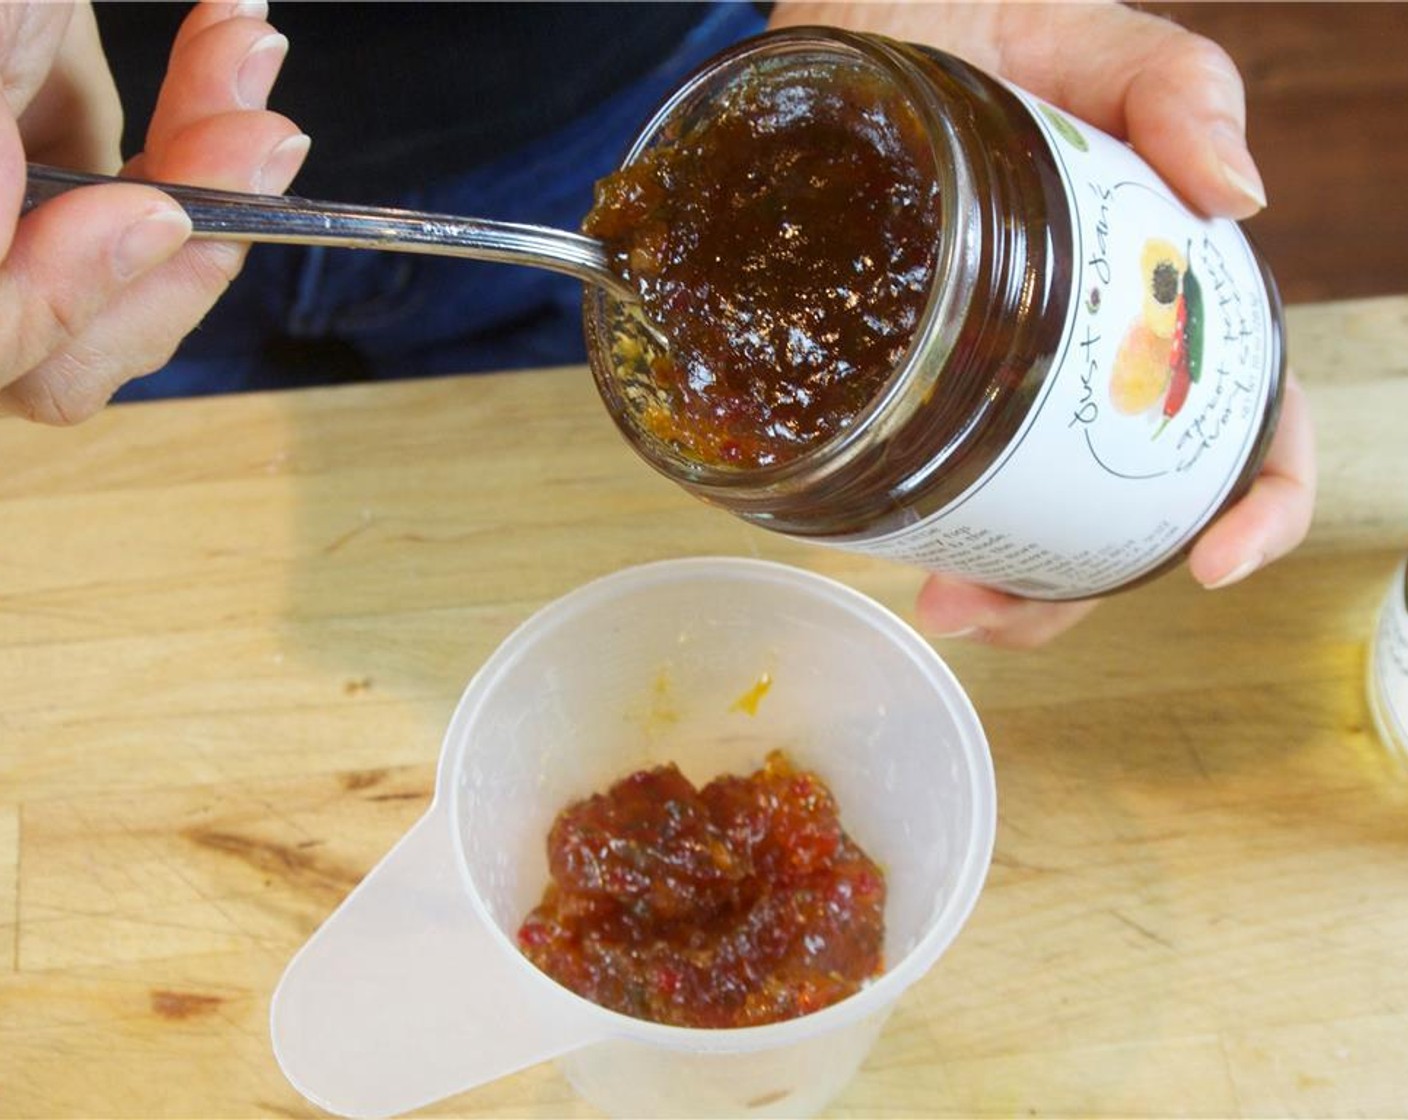 step 1 In a small bowl, mix Just Jan’s® Tangerine Marmalade (1/2 cup), Soy Sauce (3 Tbsp), Fresh Ginger (1 Tbsp), Crushed Red Pepper Flakes (1/4 tsp), Garlic (3 cloves), Nuoc Mam (2 Tbsp), Mirin (1 tsp) and Sesame Oil (1 tsp) for the marinade.